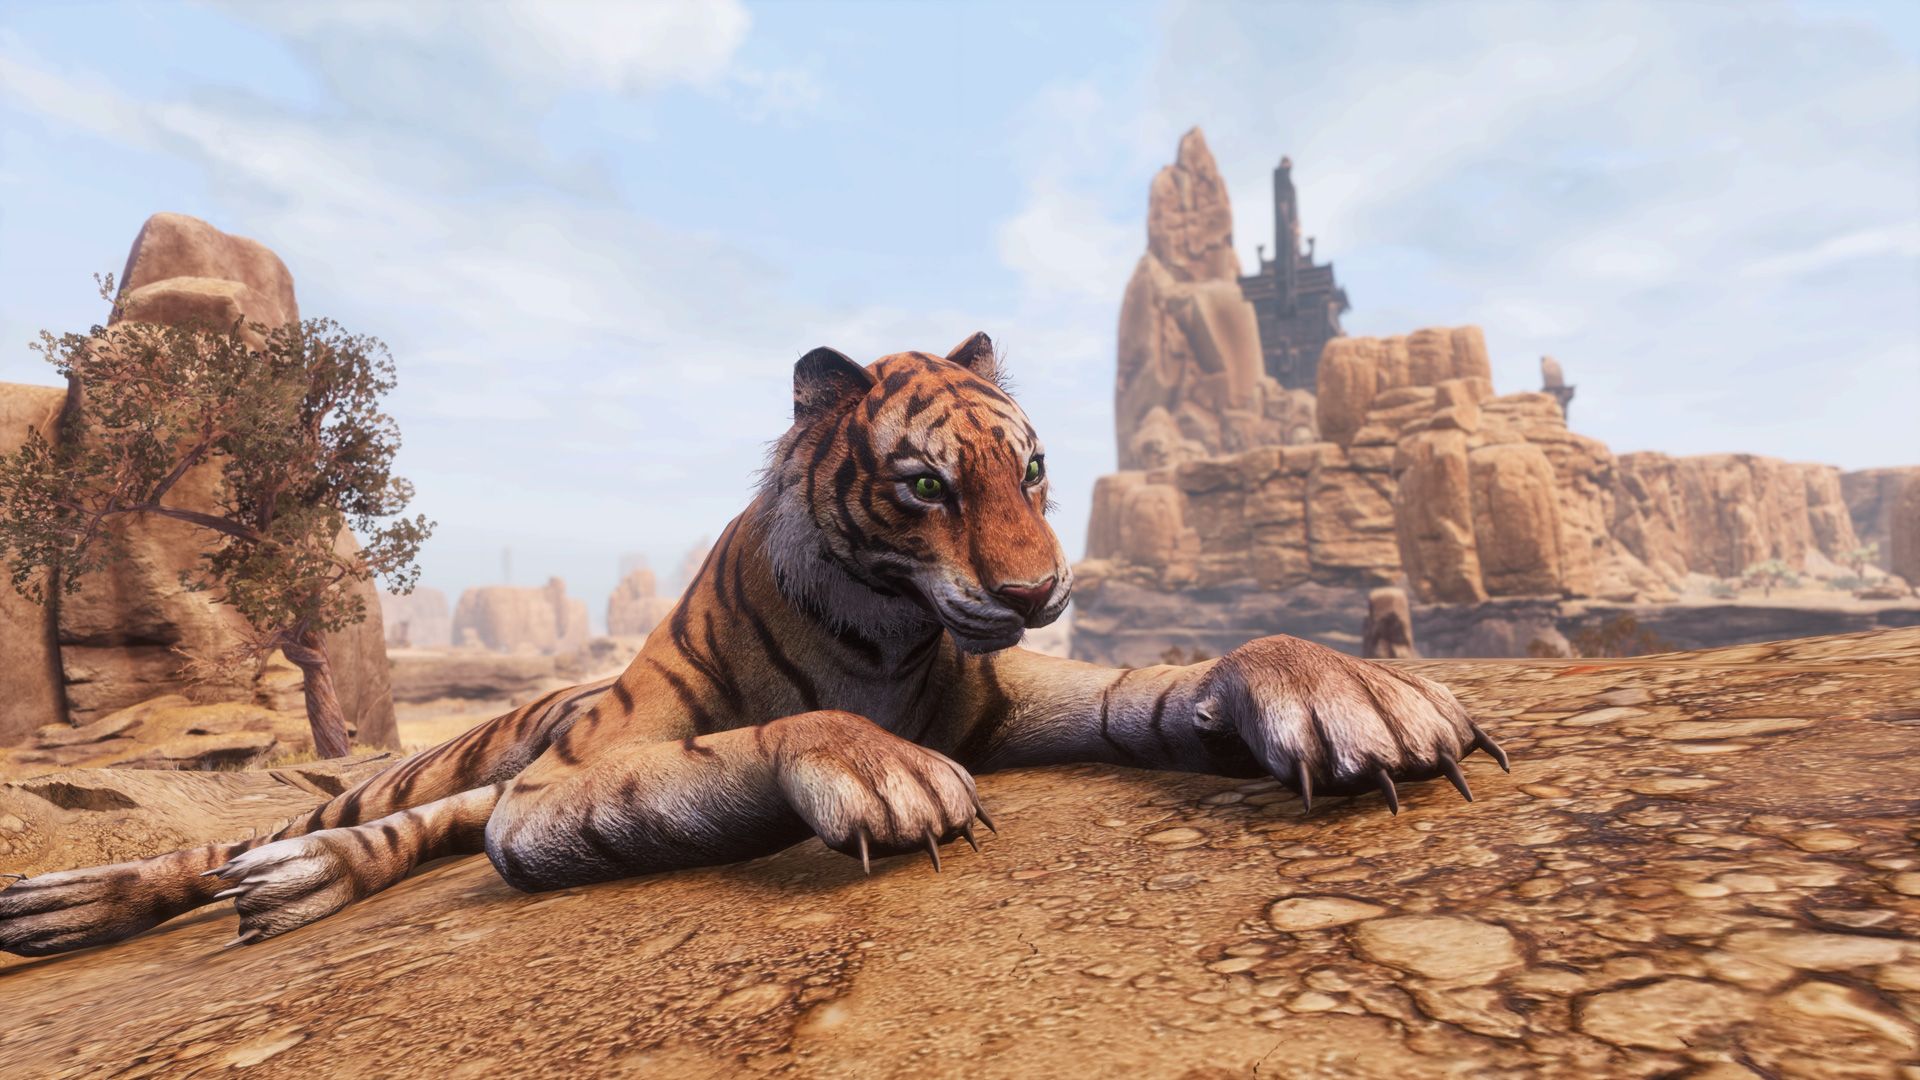 Conan Exiles Issues a Massive Parity Patch for Xbox One